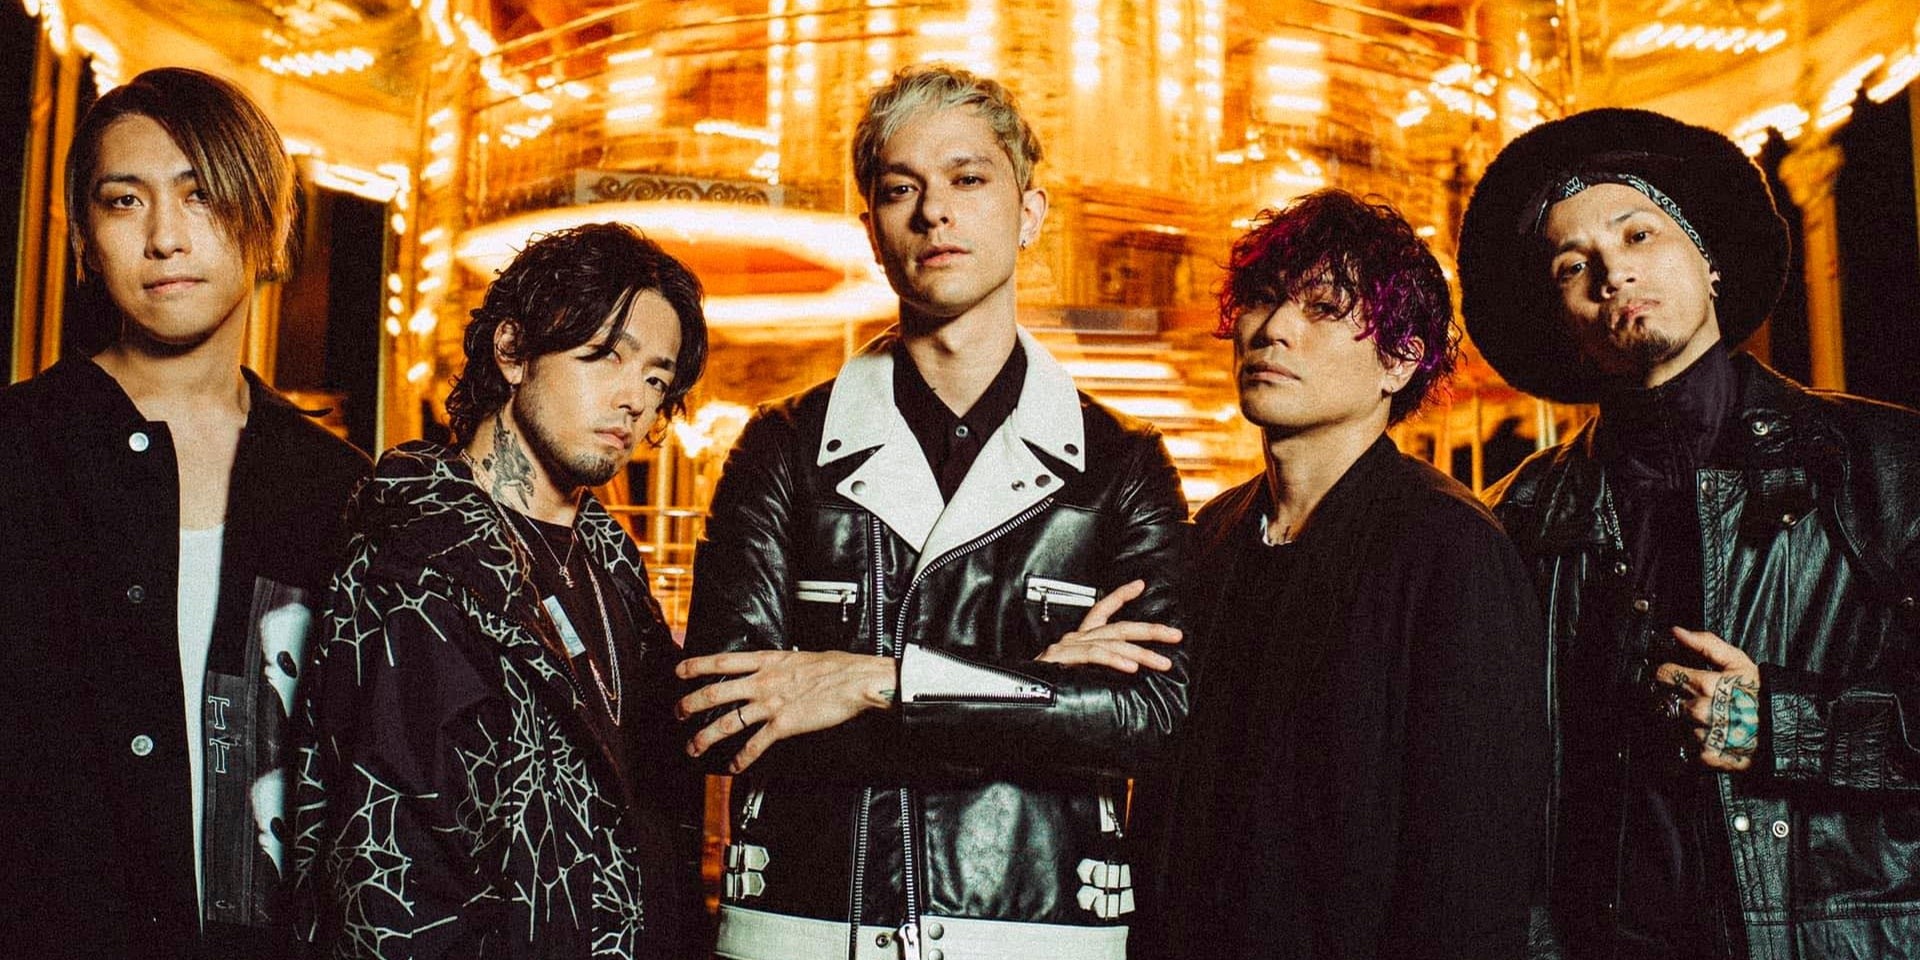 coldrain release new single 'Before I Go' from upcoming album 'Nonnegative' – watch